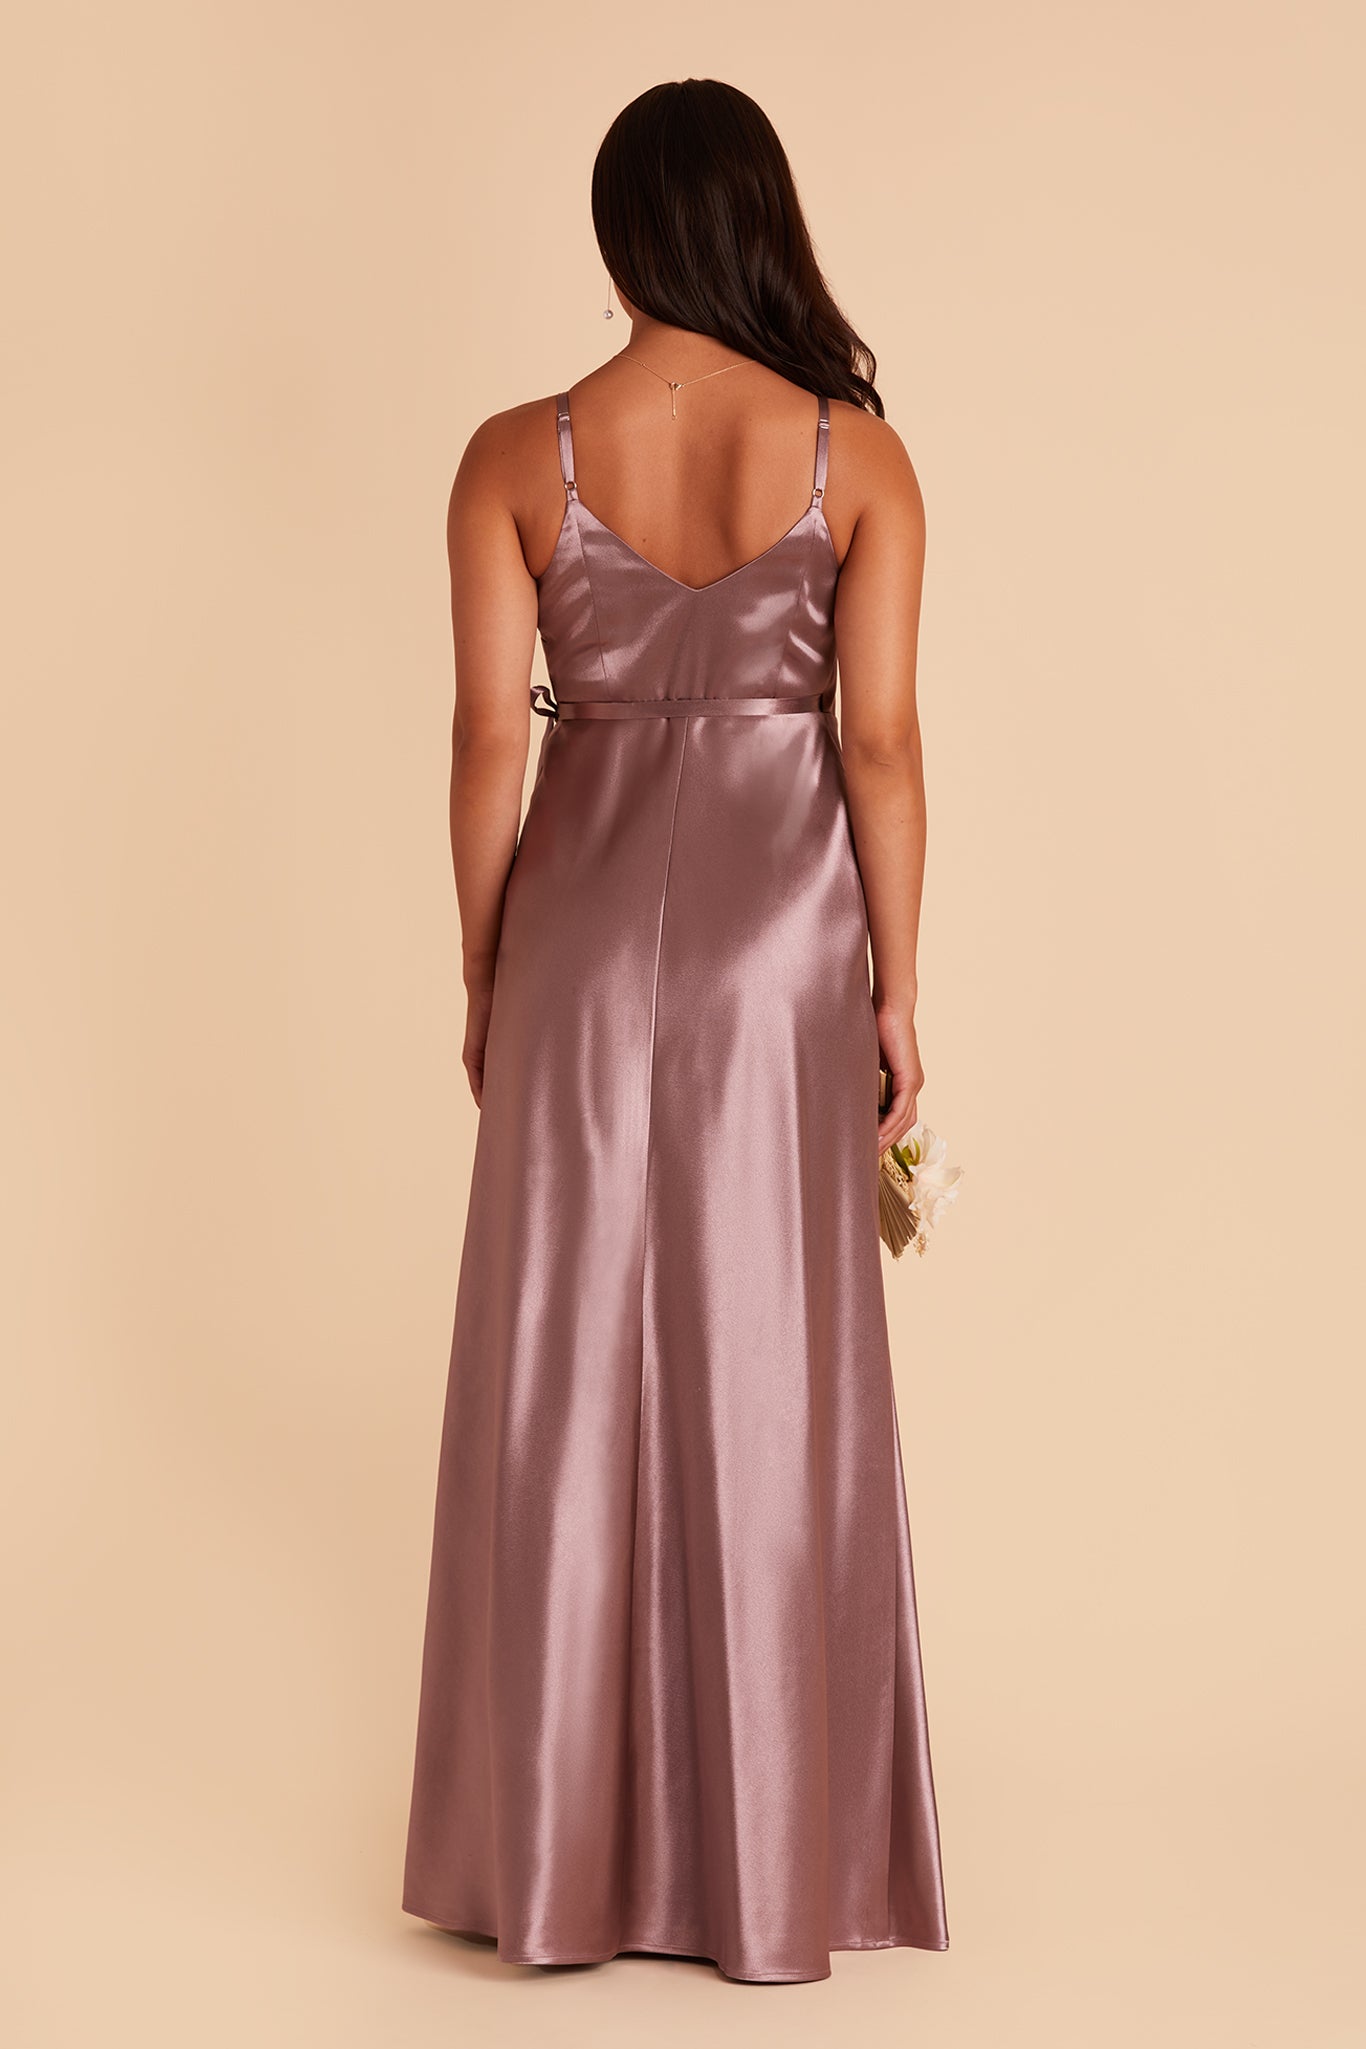 Cindy bridesmaid dress with slit in dark mauve satin by Birdy Grey, back view